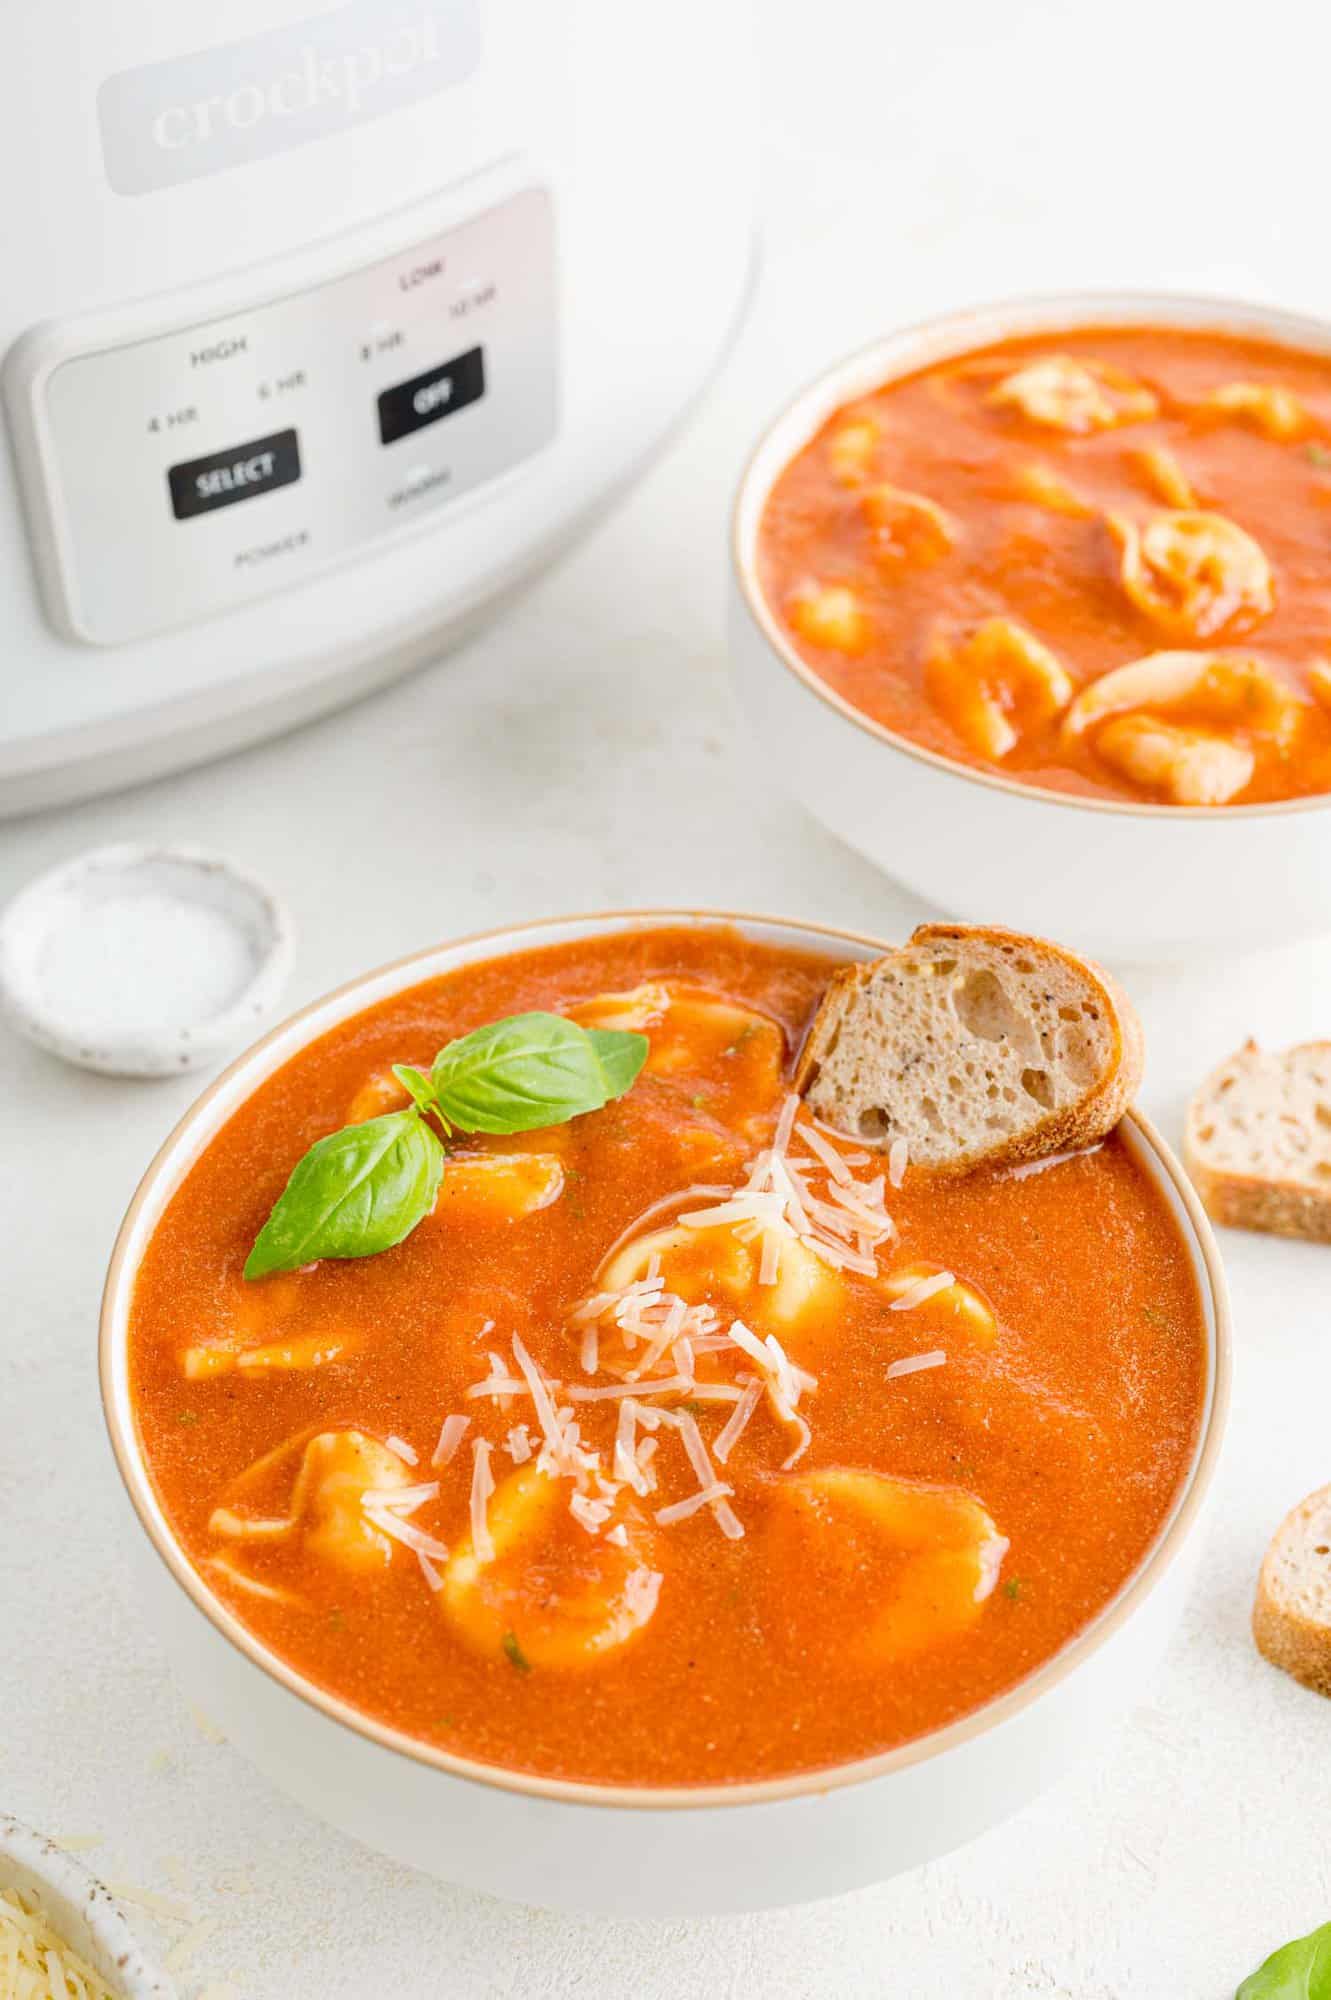 Tomato soup in white bowls with crockpot in the background.